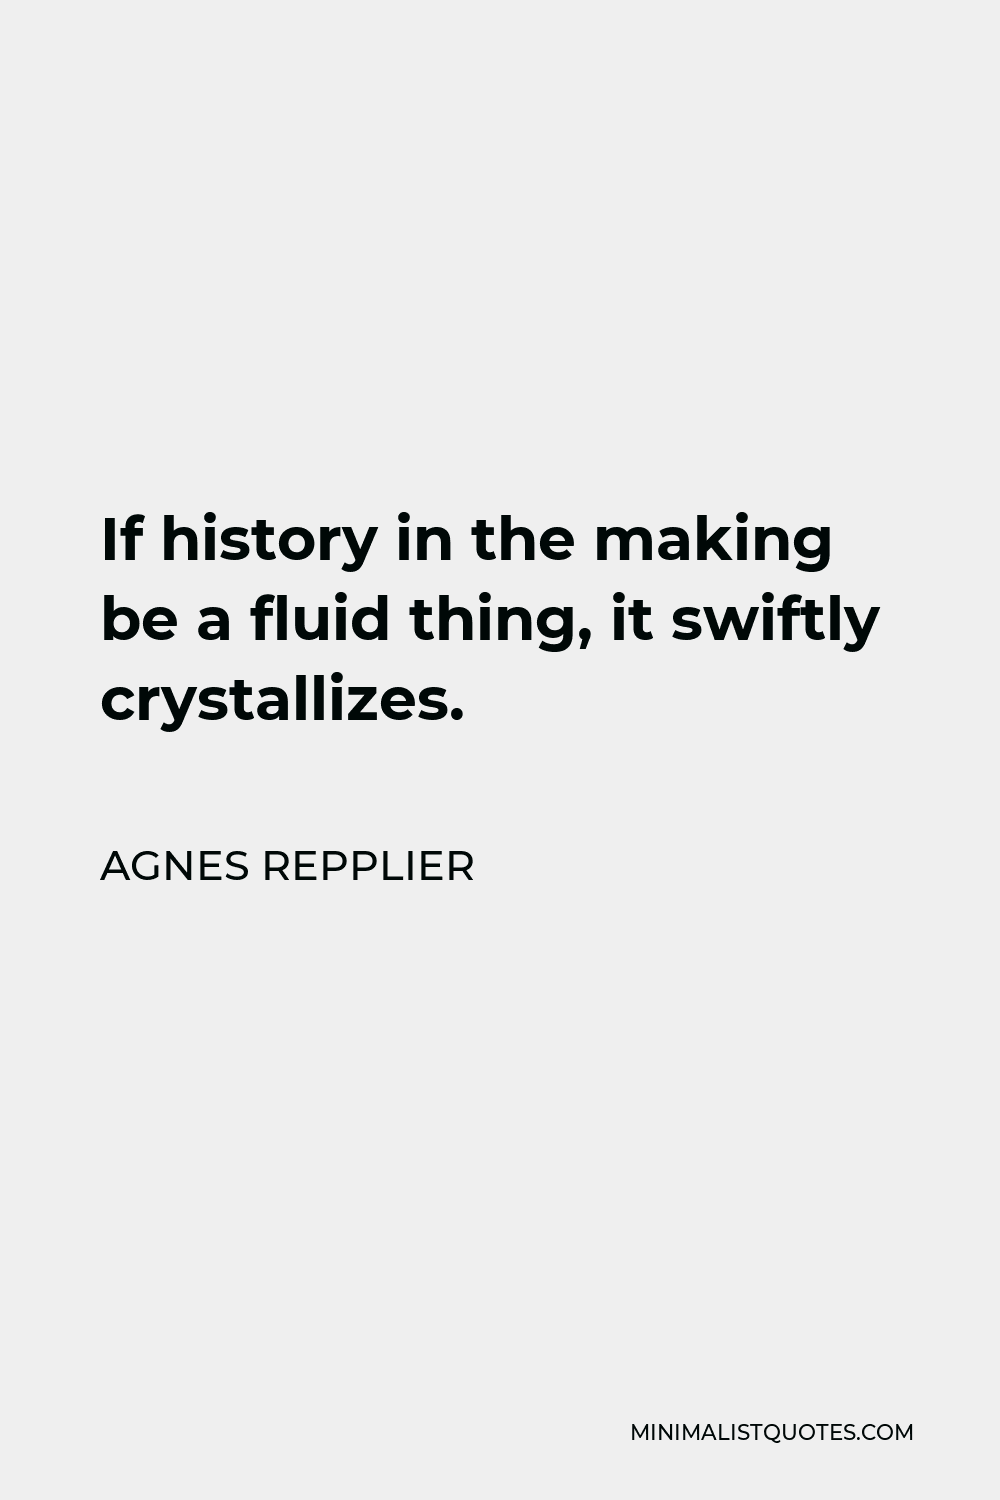 Agnes Repplier Quote - If history in the making be a fluid thing, it swiftly crystallizes.